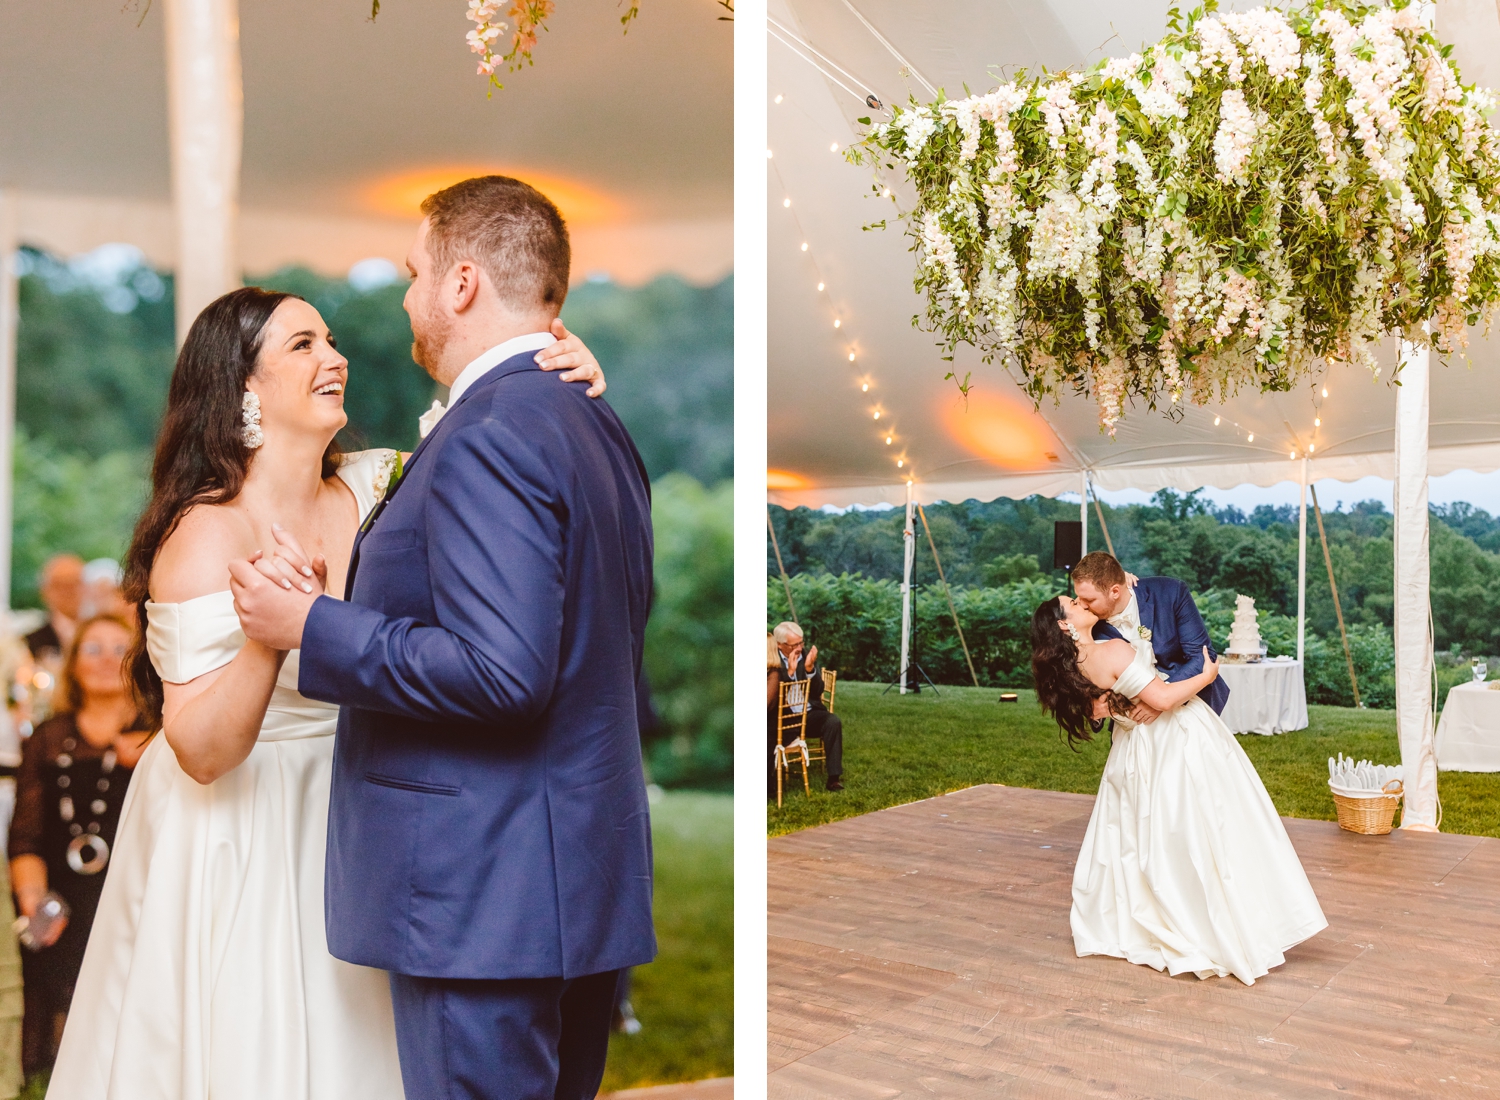 Bride and groom's first dance at Ladew Topiary Gardens wedding | groom dipping bride after first dance | Brooke Michelle Photo